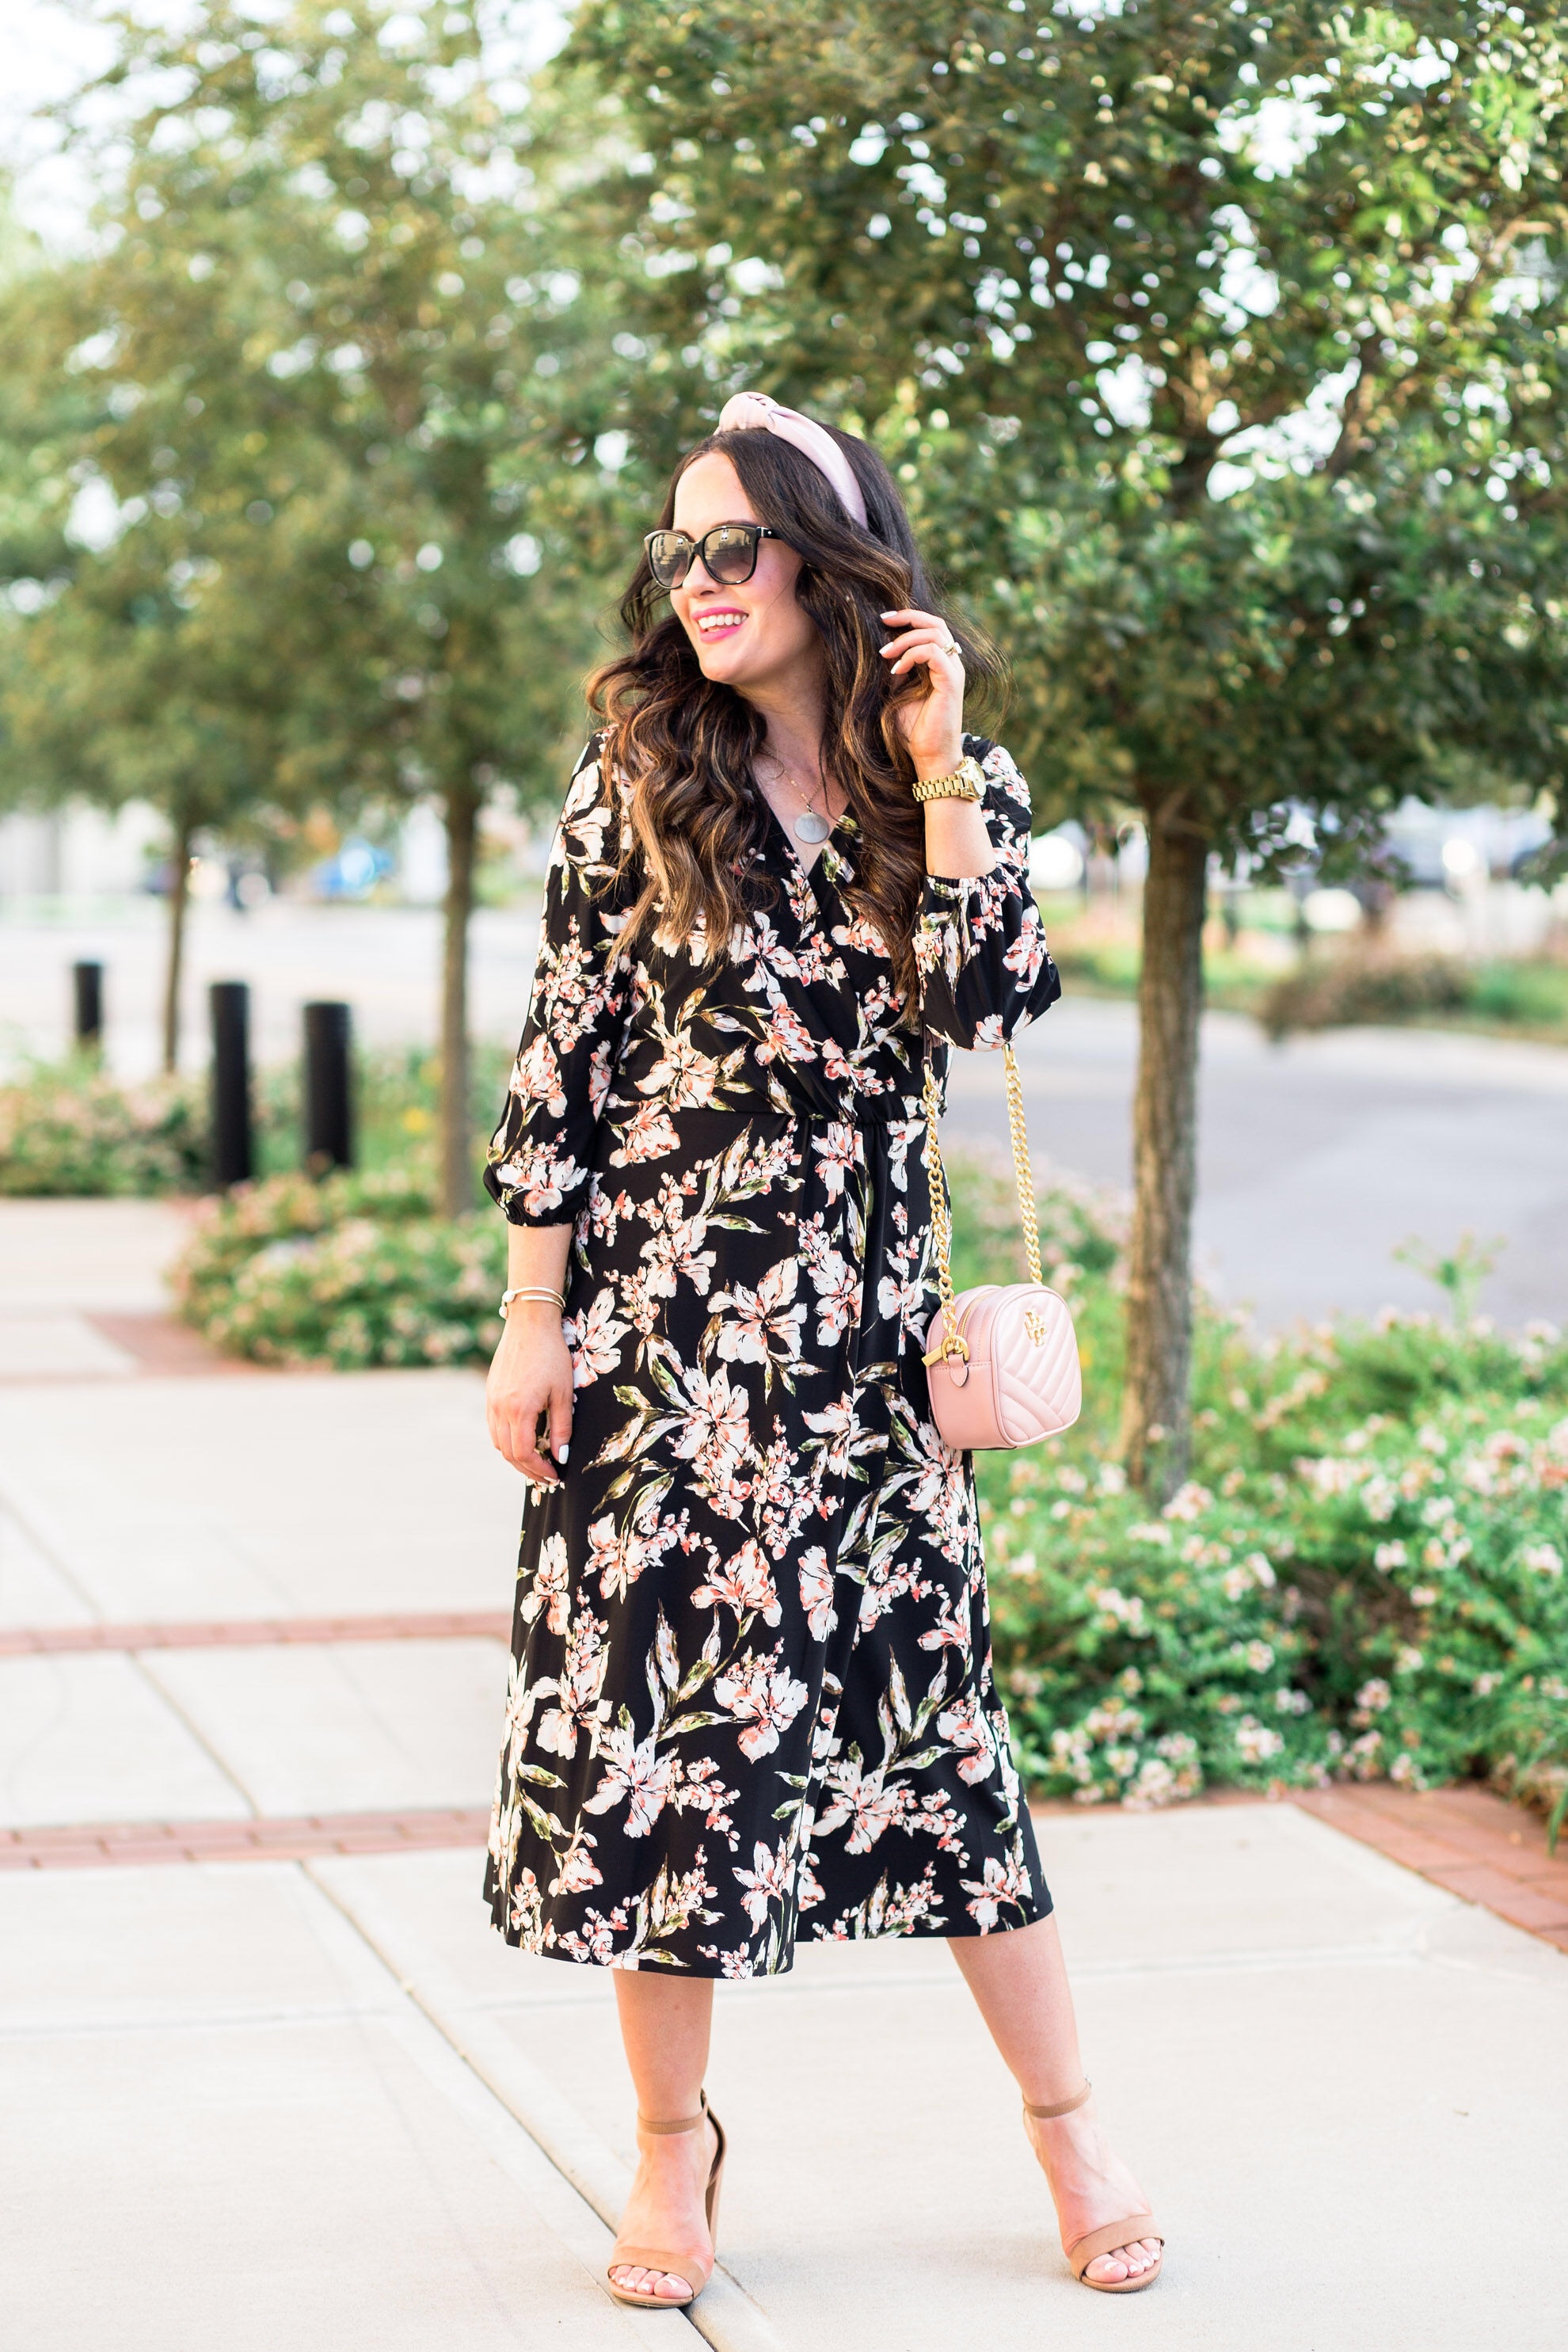 Perfect Fall Floral Wrap Dresses + Bloomingdale's Up To 25% Off Promo! -  The Double Take Girls